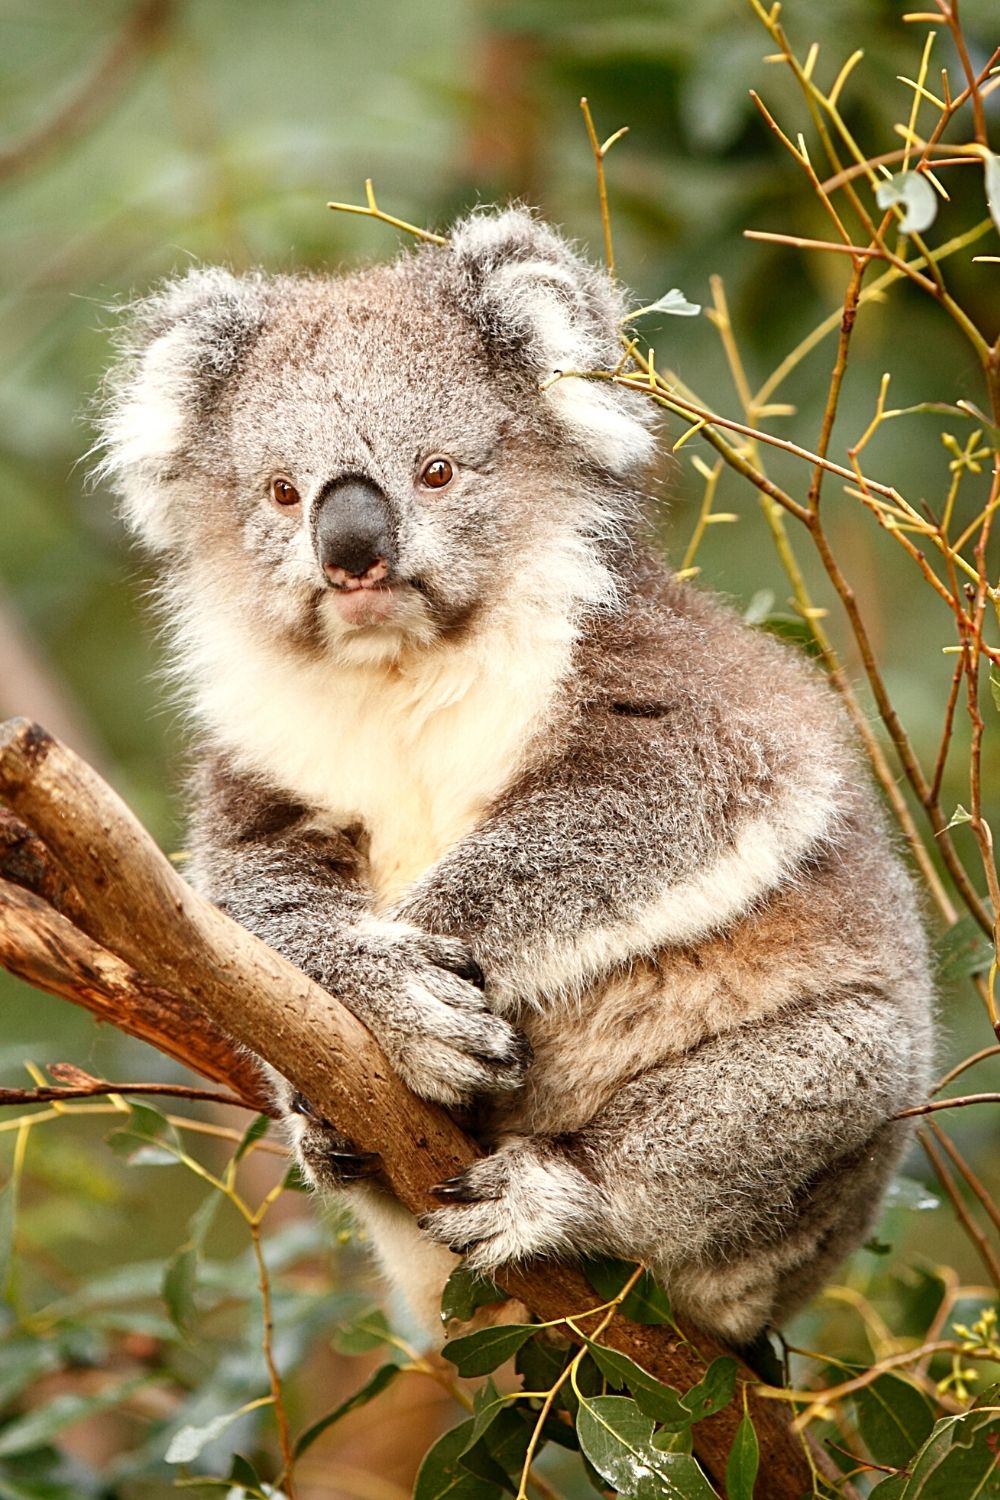 When you cross the boundaries of a koala, they quickly become aggressive